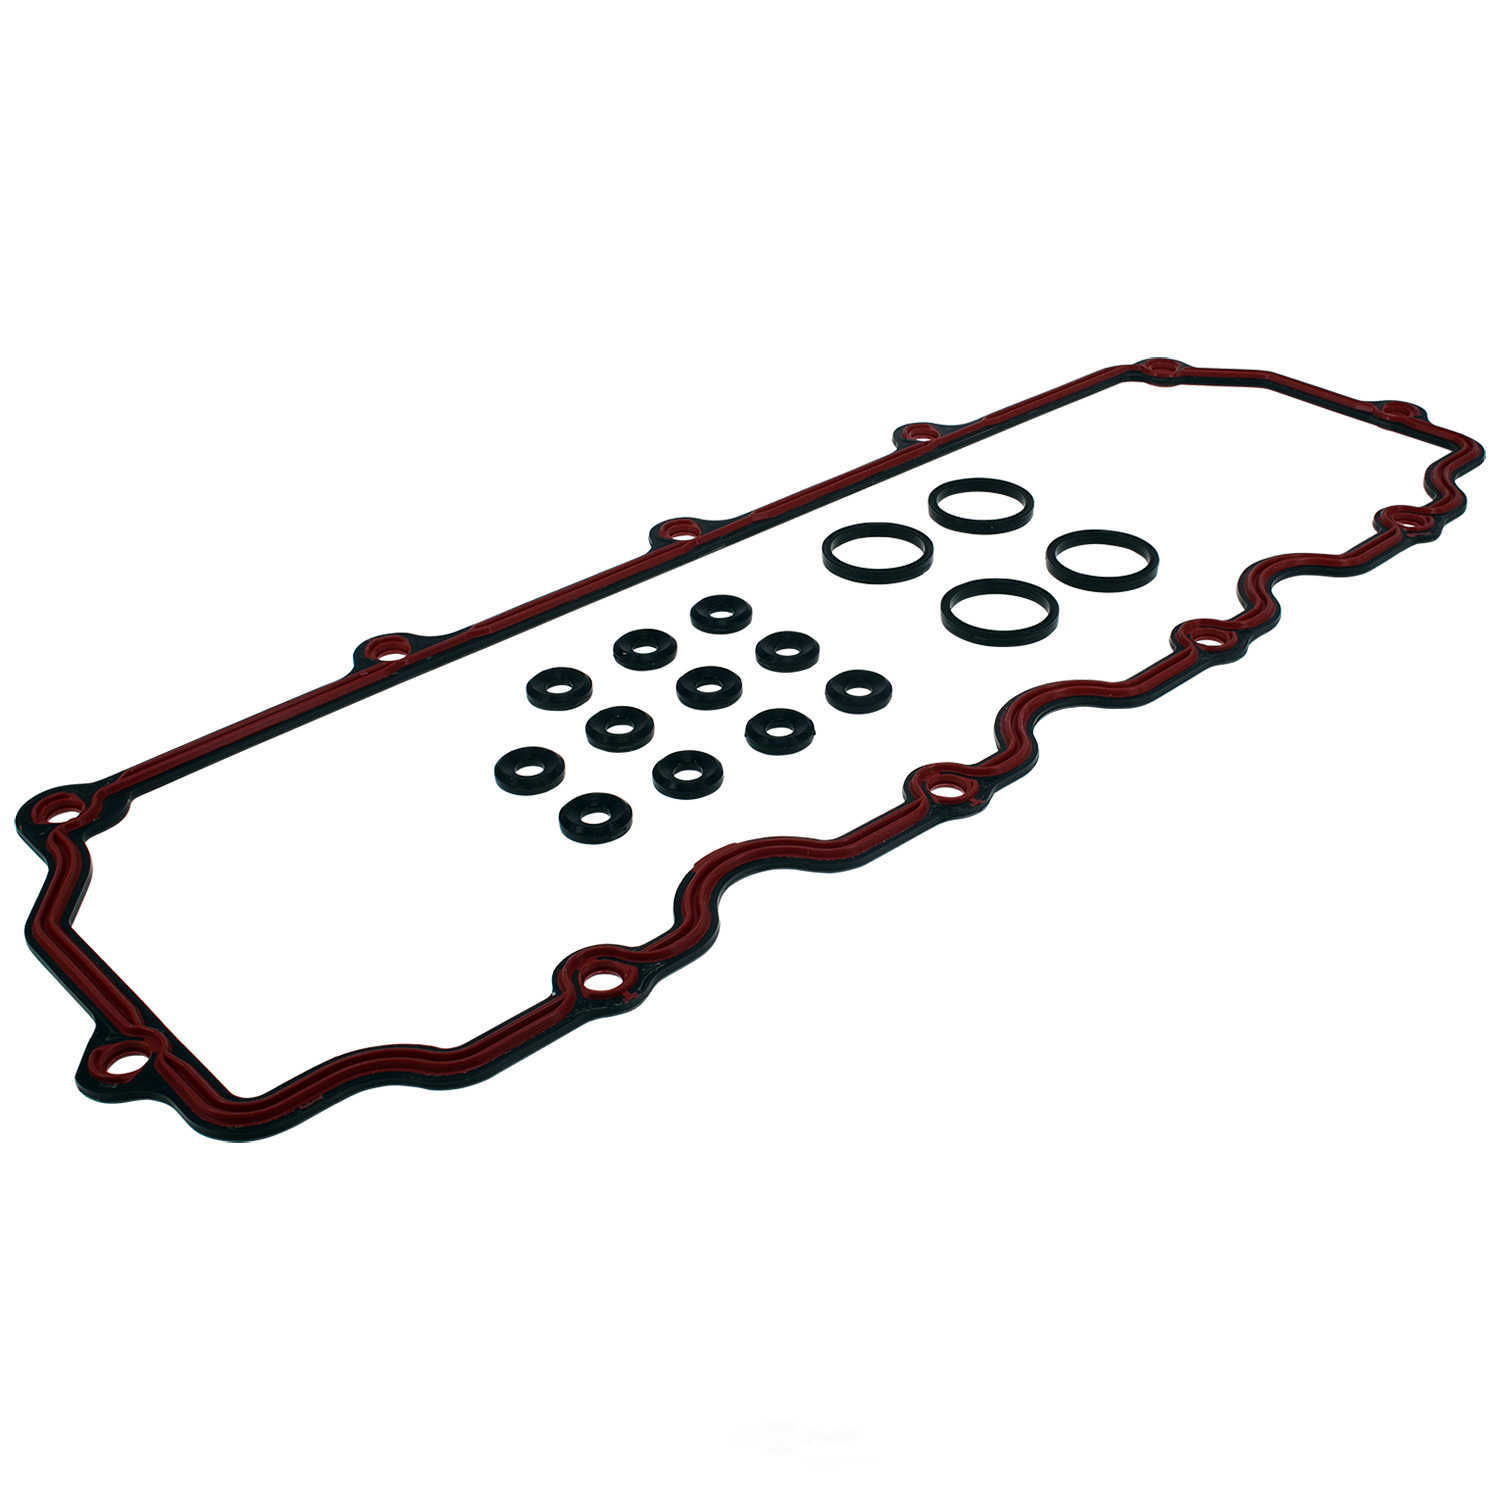 GB REMANUFACTURING INC. - Valve Cover Gasket Kit - GBR 522-031